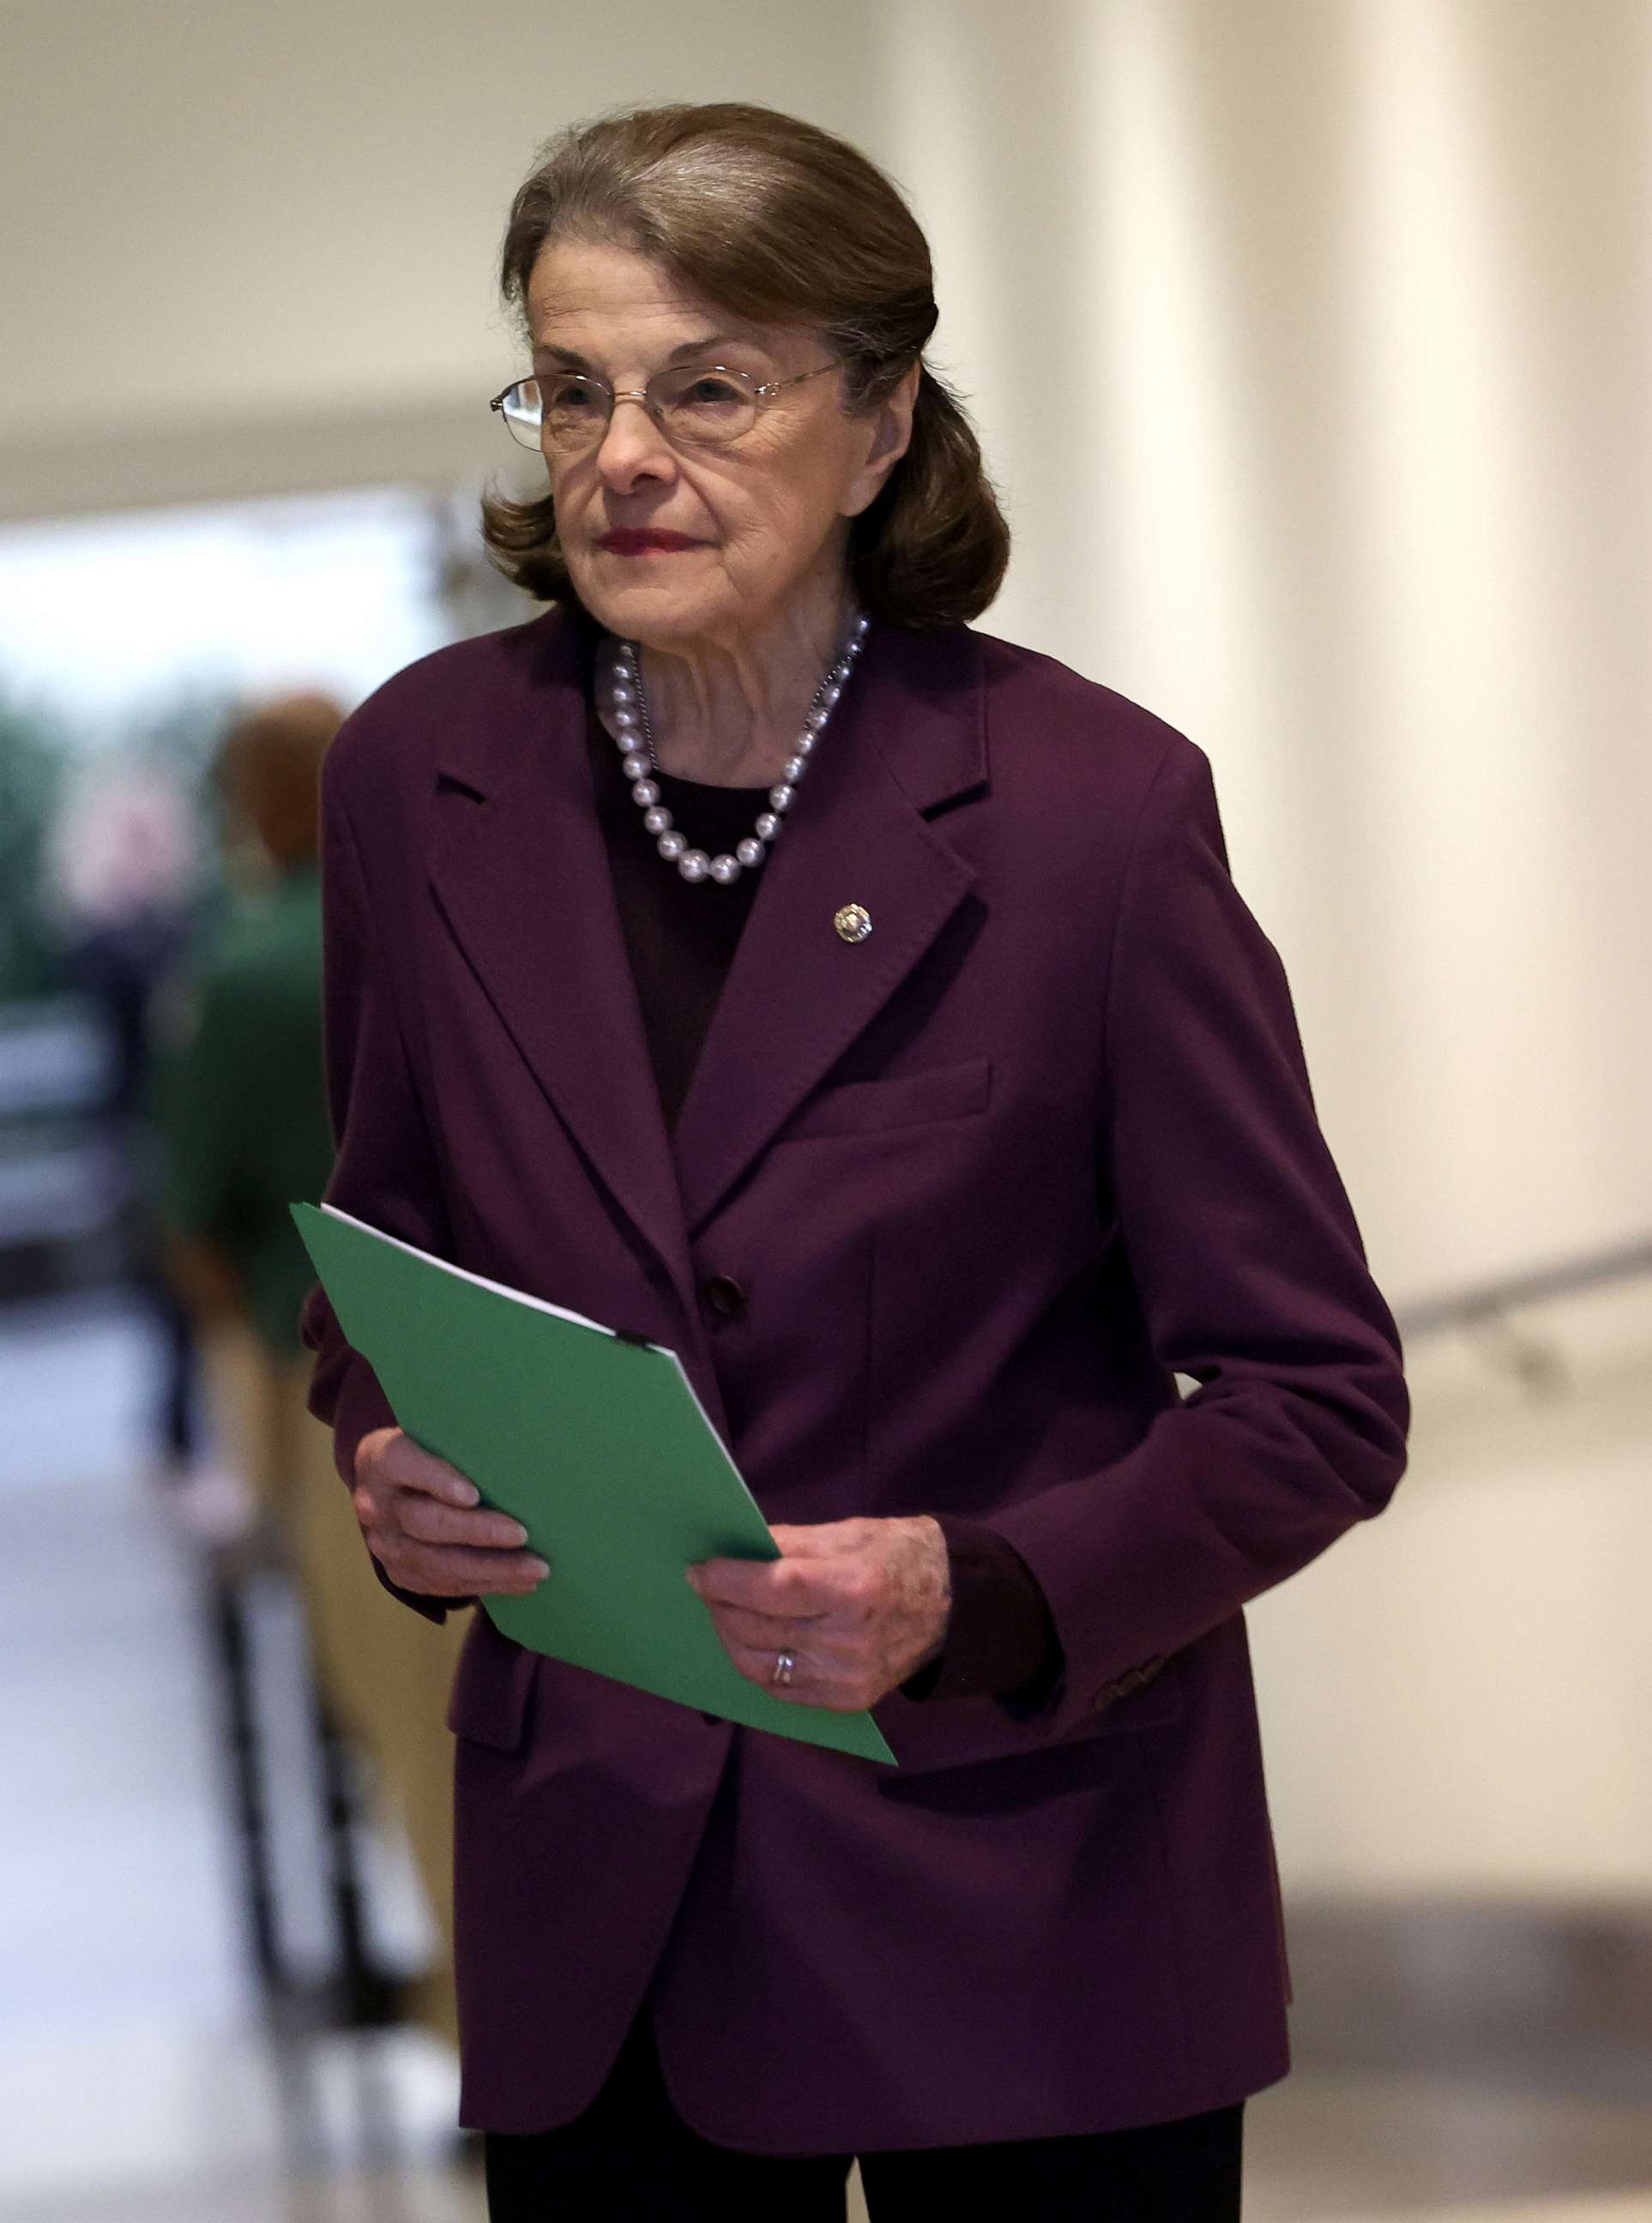 PHOTO: Sen. Dianne Feinstein arrives for a Senate briefing on China at the U.S Capitol on Feb. 15, 2023, in Washington, D.C.